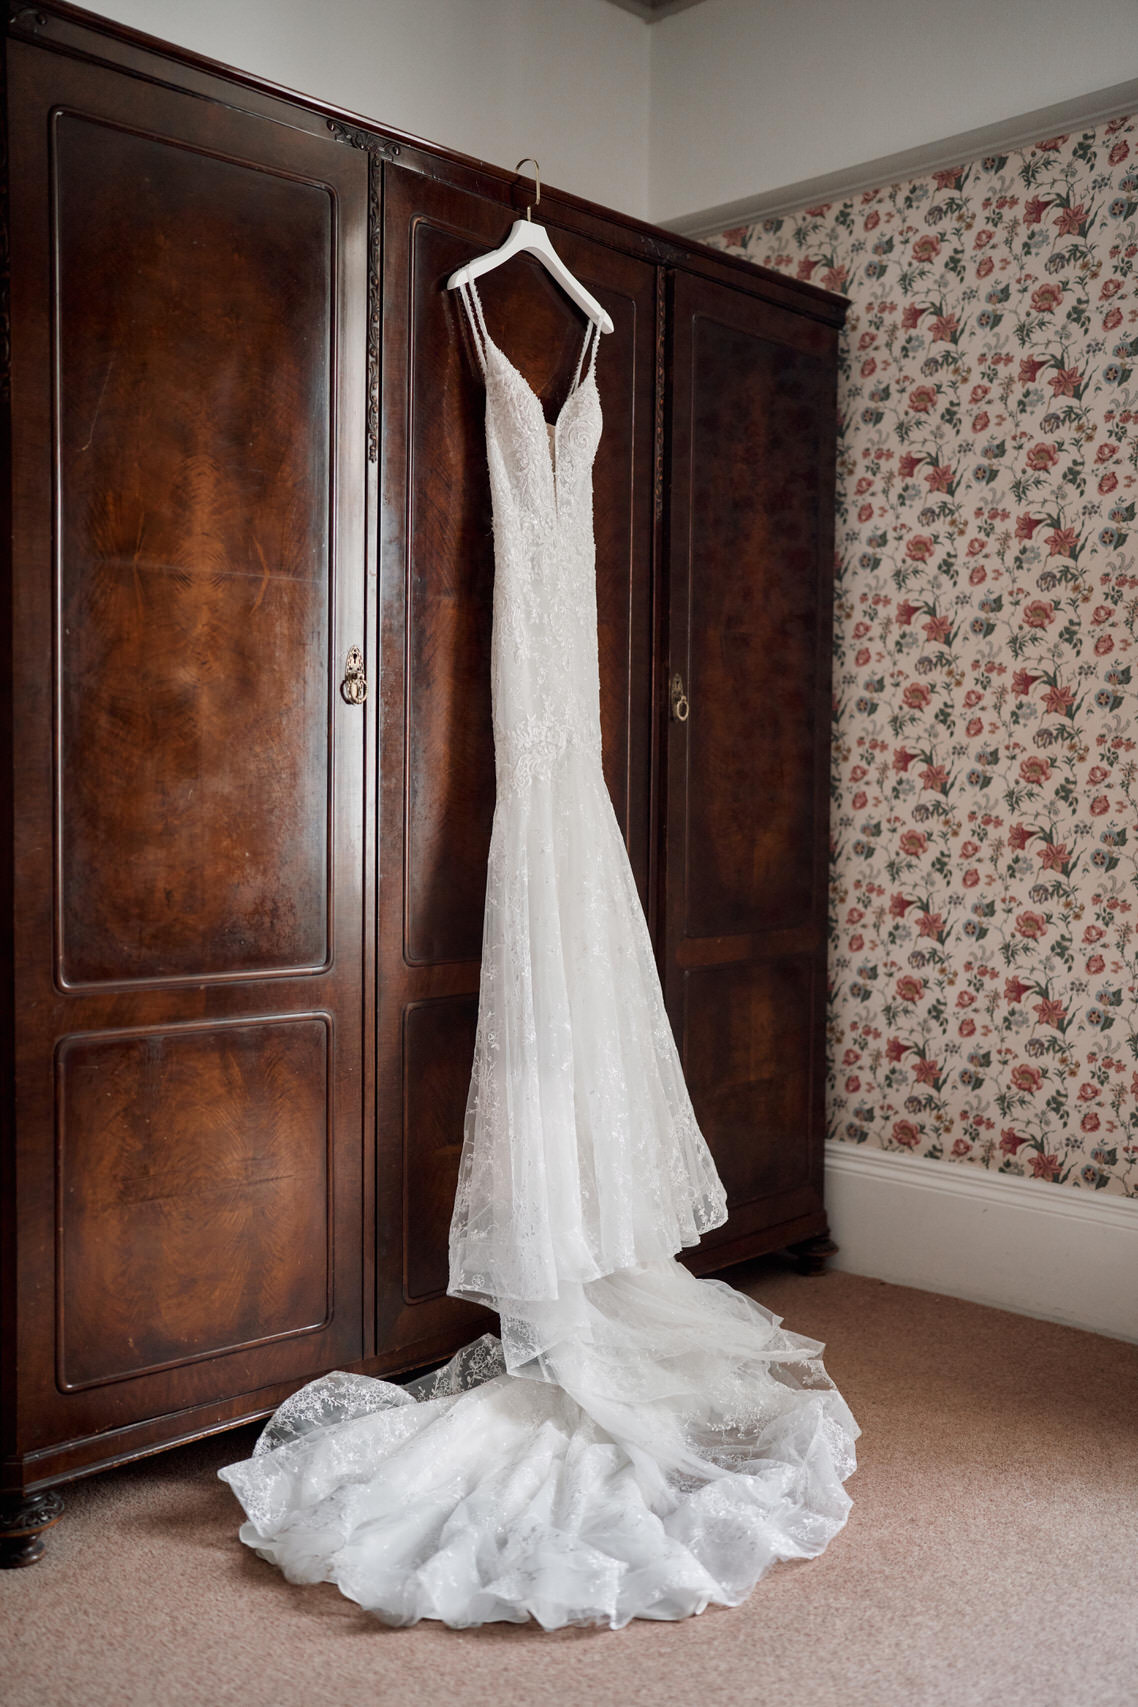 A wedding gown is hanging on a wardrobe in a room decorated with flower-patterned wallpaper.